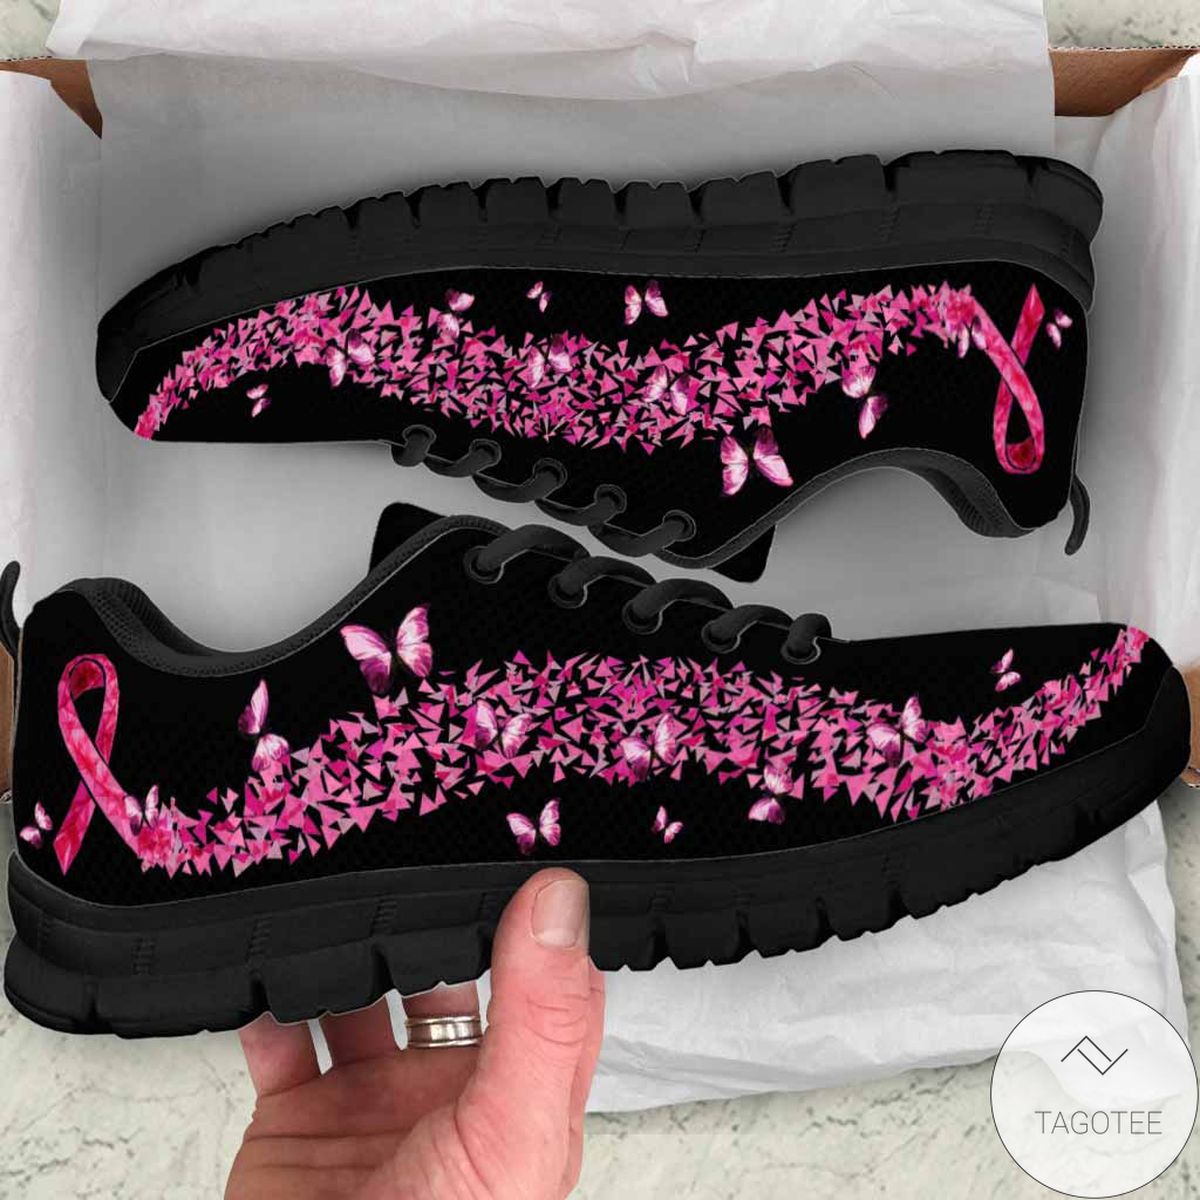 Never Give Up Breast Cancer Awareness Sneakers